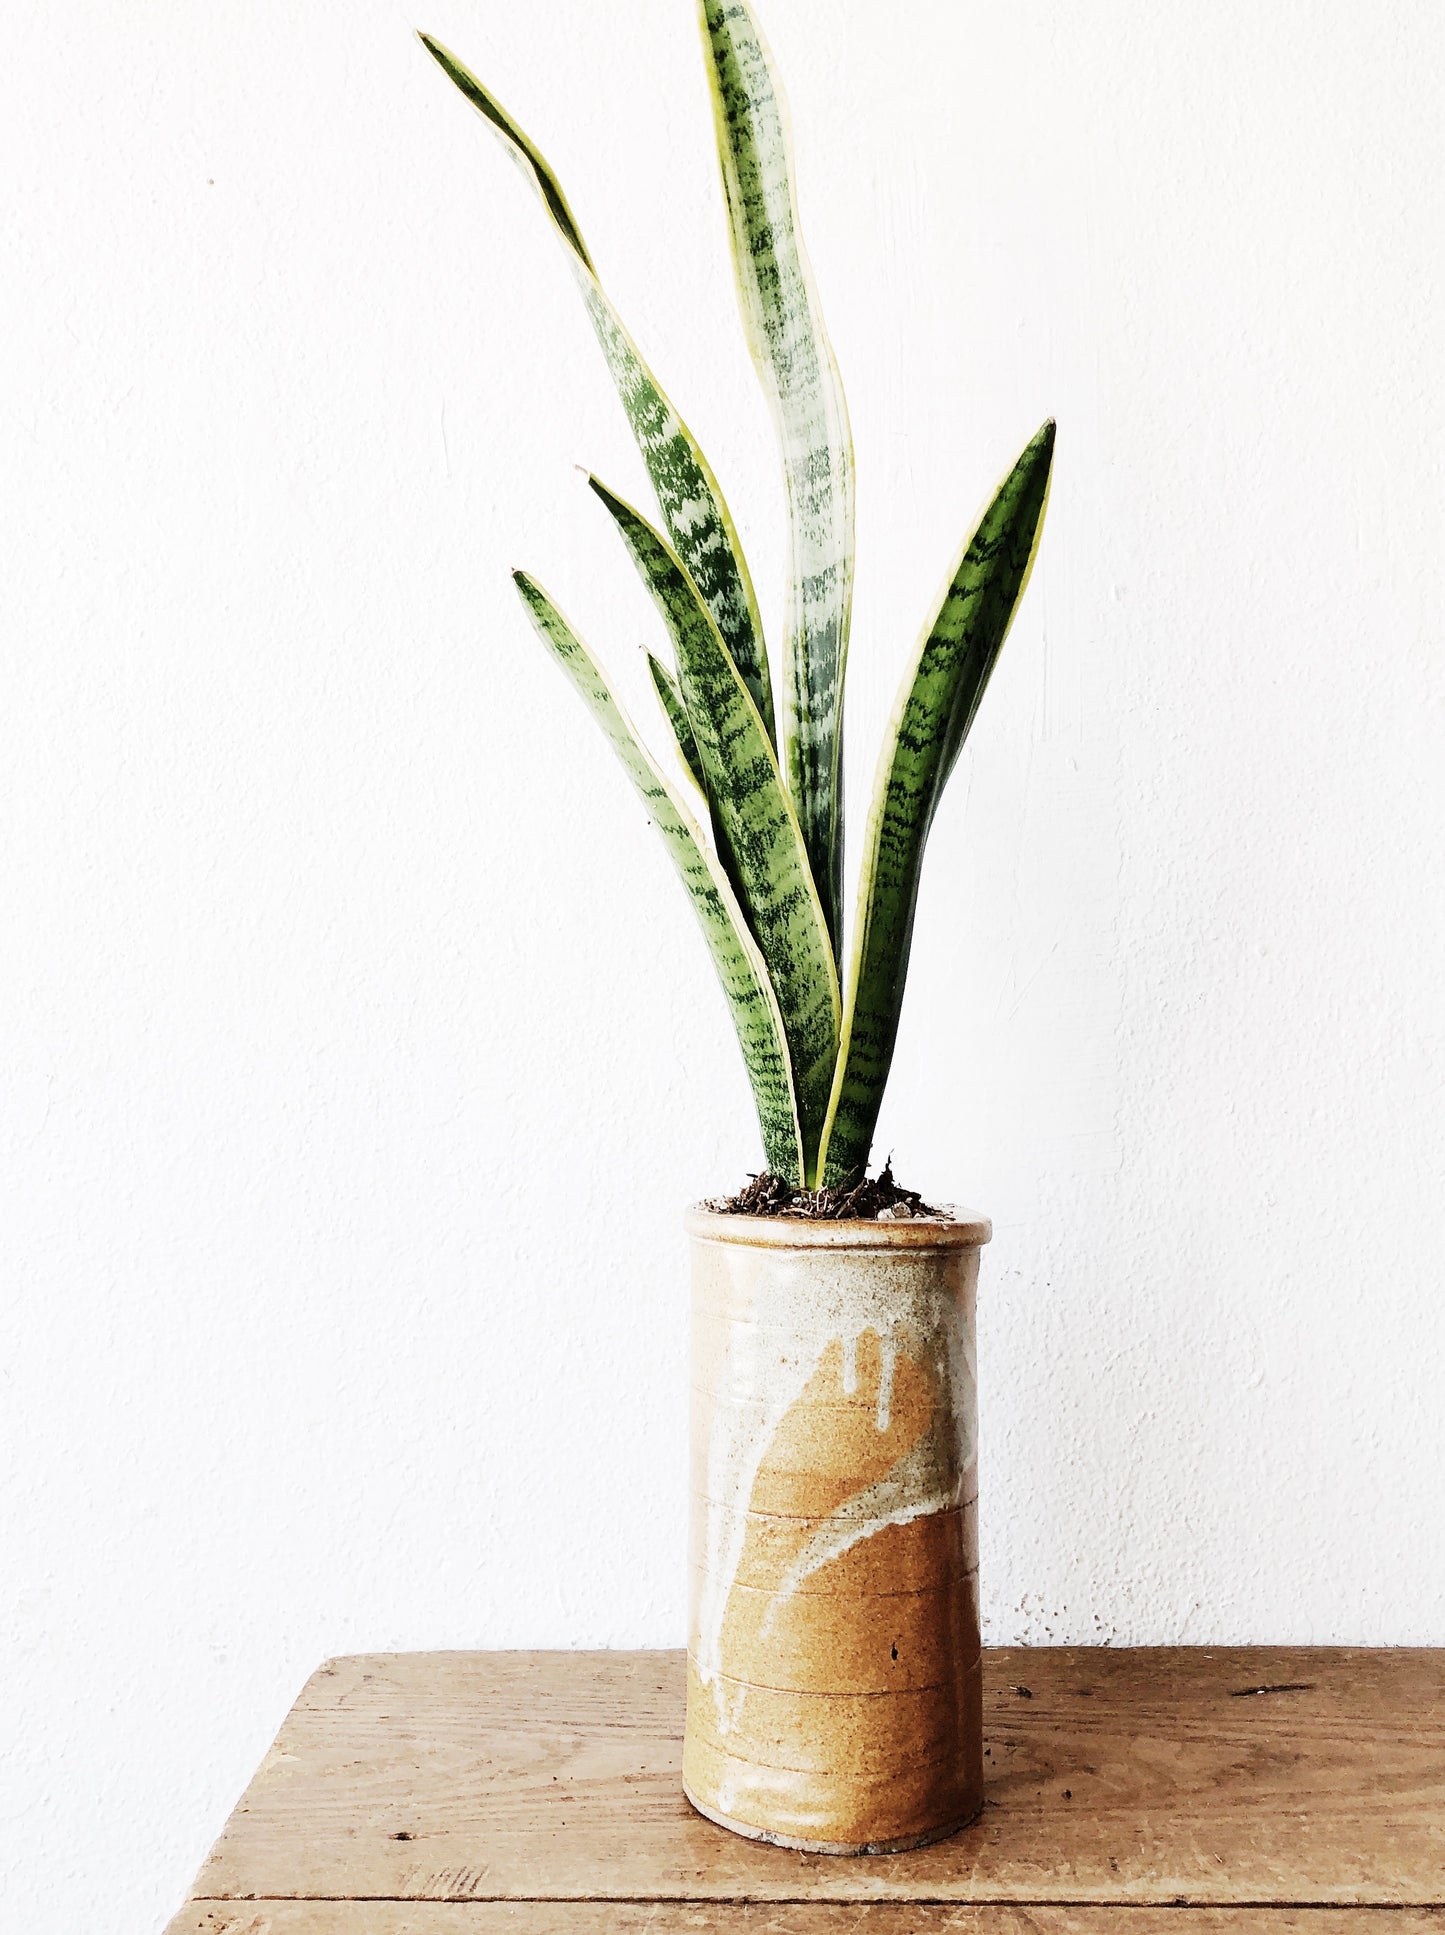 Handmade Ceramic Planter with or without Plant